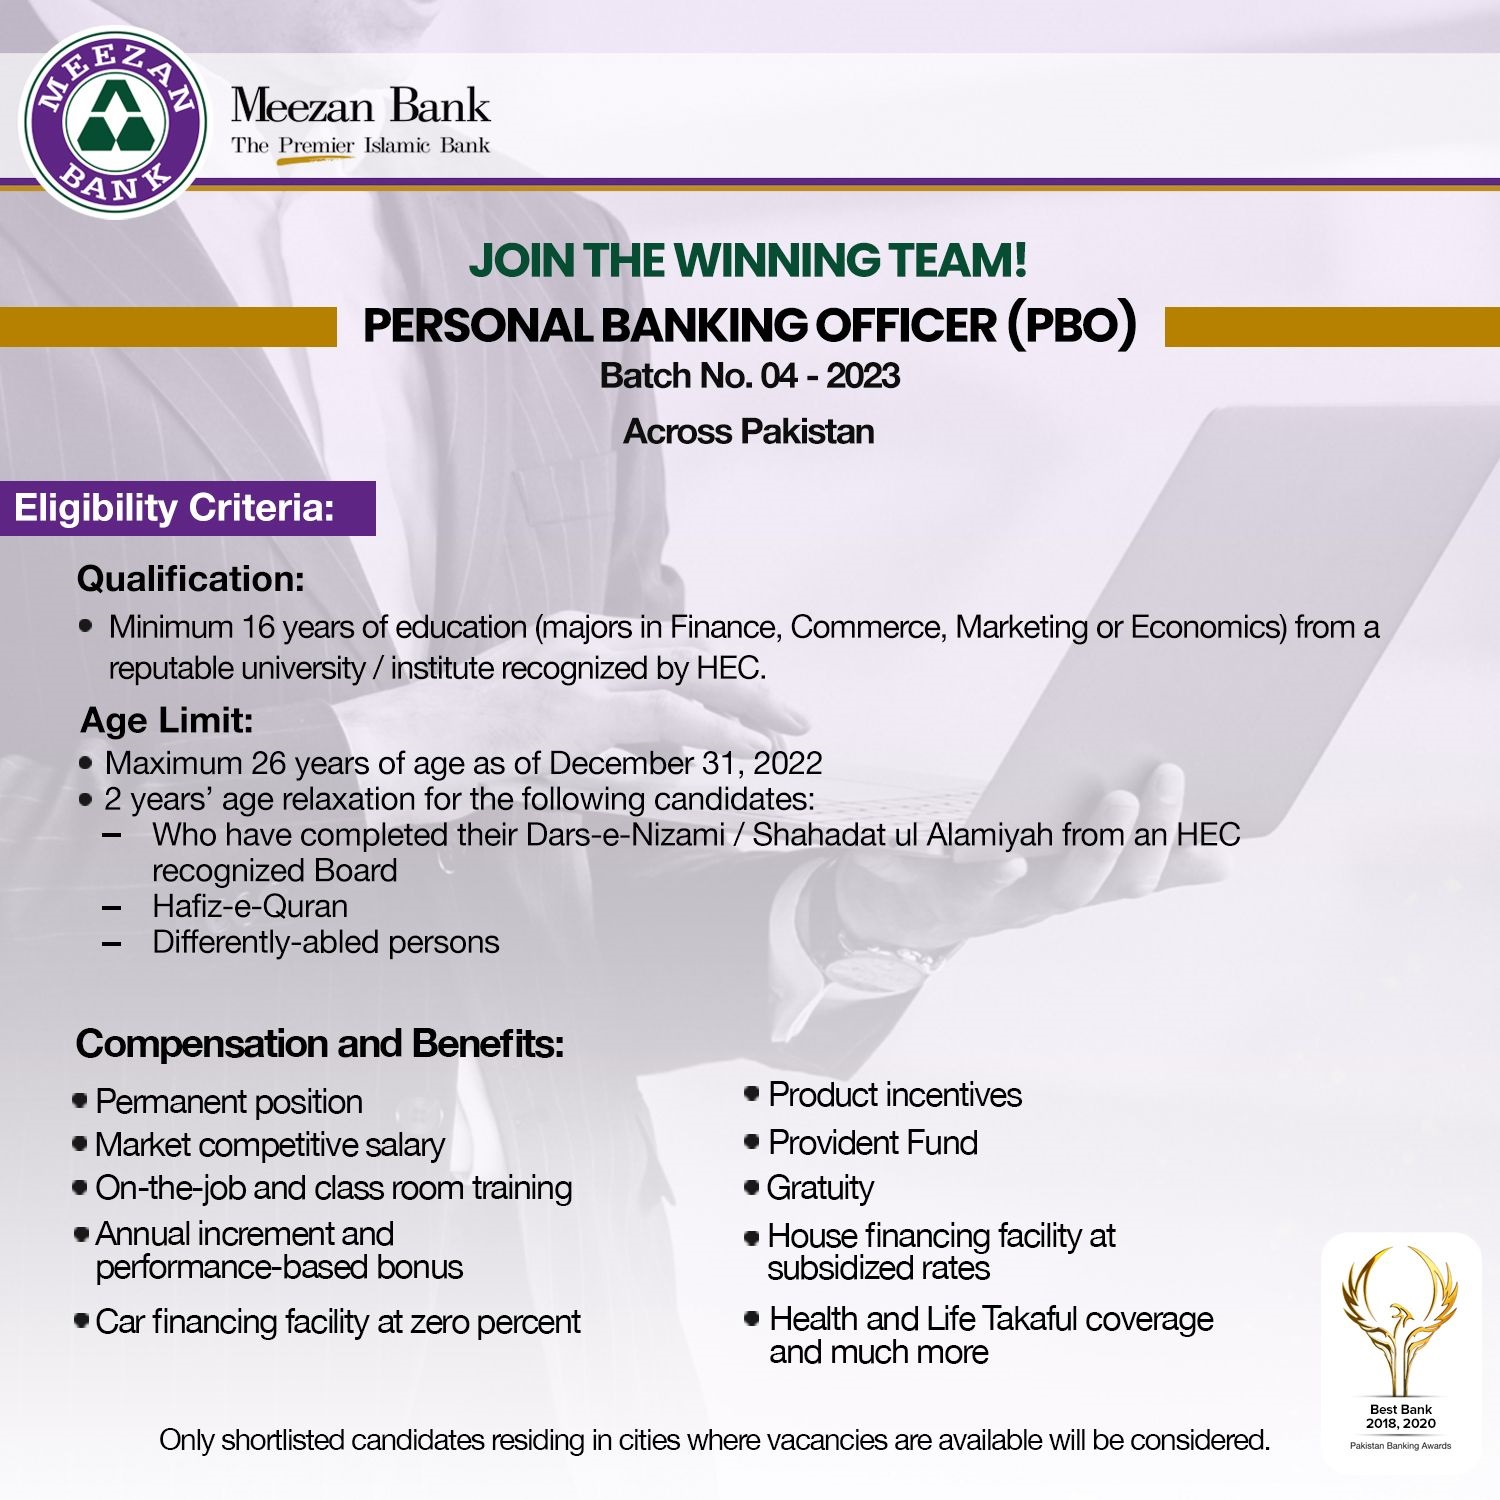 Meezan Bank is looking to hire highly talented and energetic individuals for its Personal Banking Officer (PBO) Batch 2023.